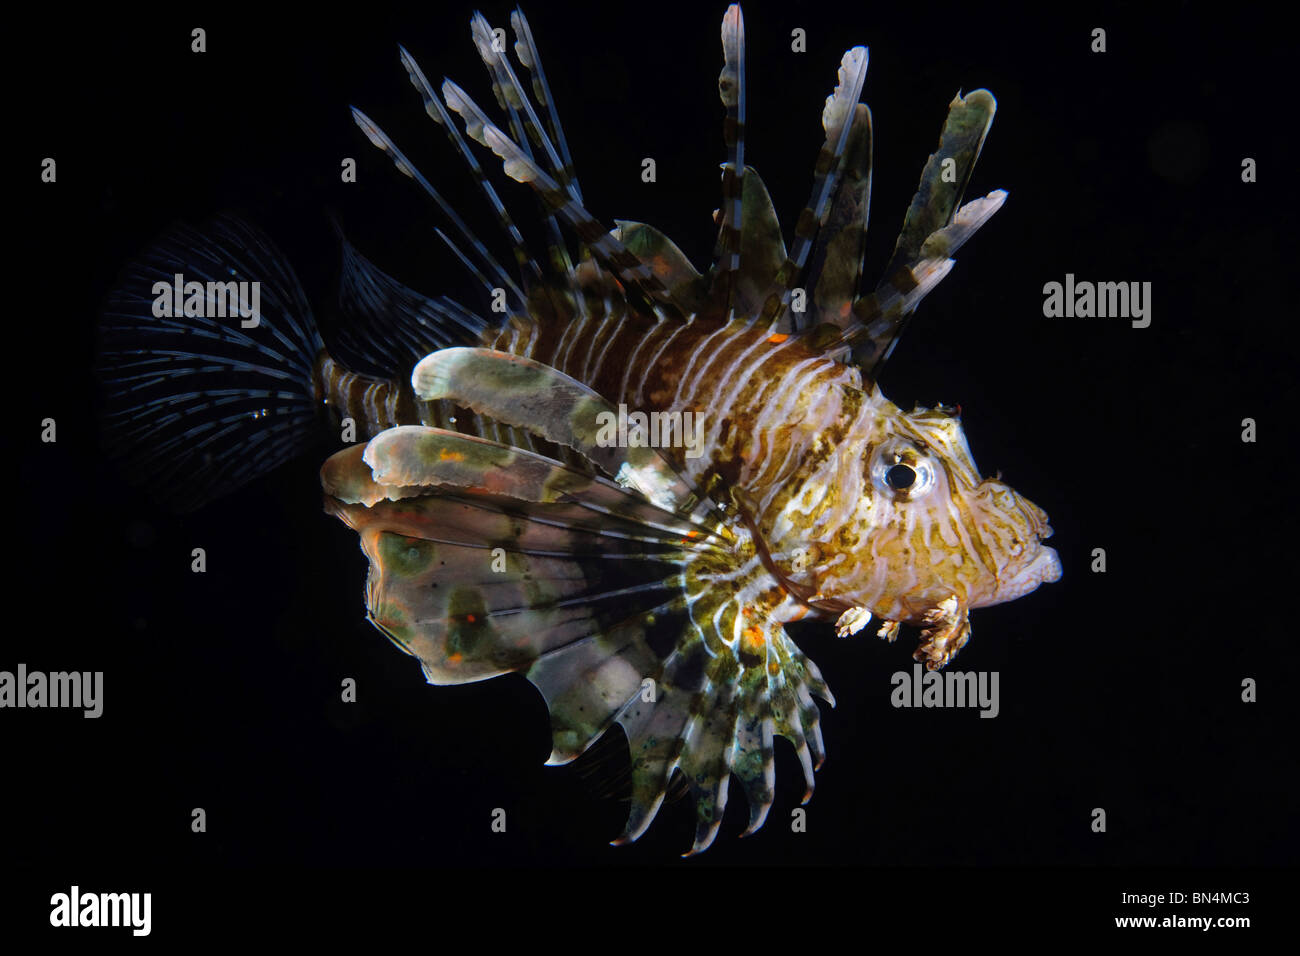 Israel, Eilat, Red Sea, – Underwater night photograph of a radial Lionfish Pterois radiata  Stock Photo